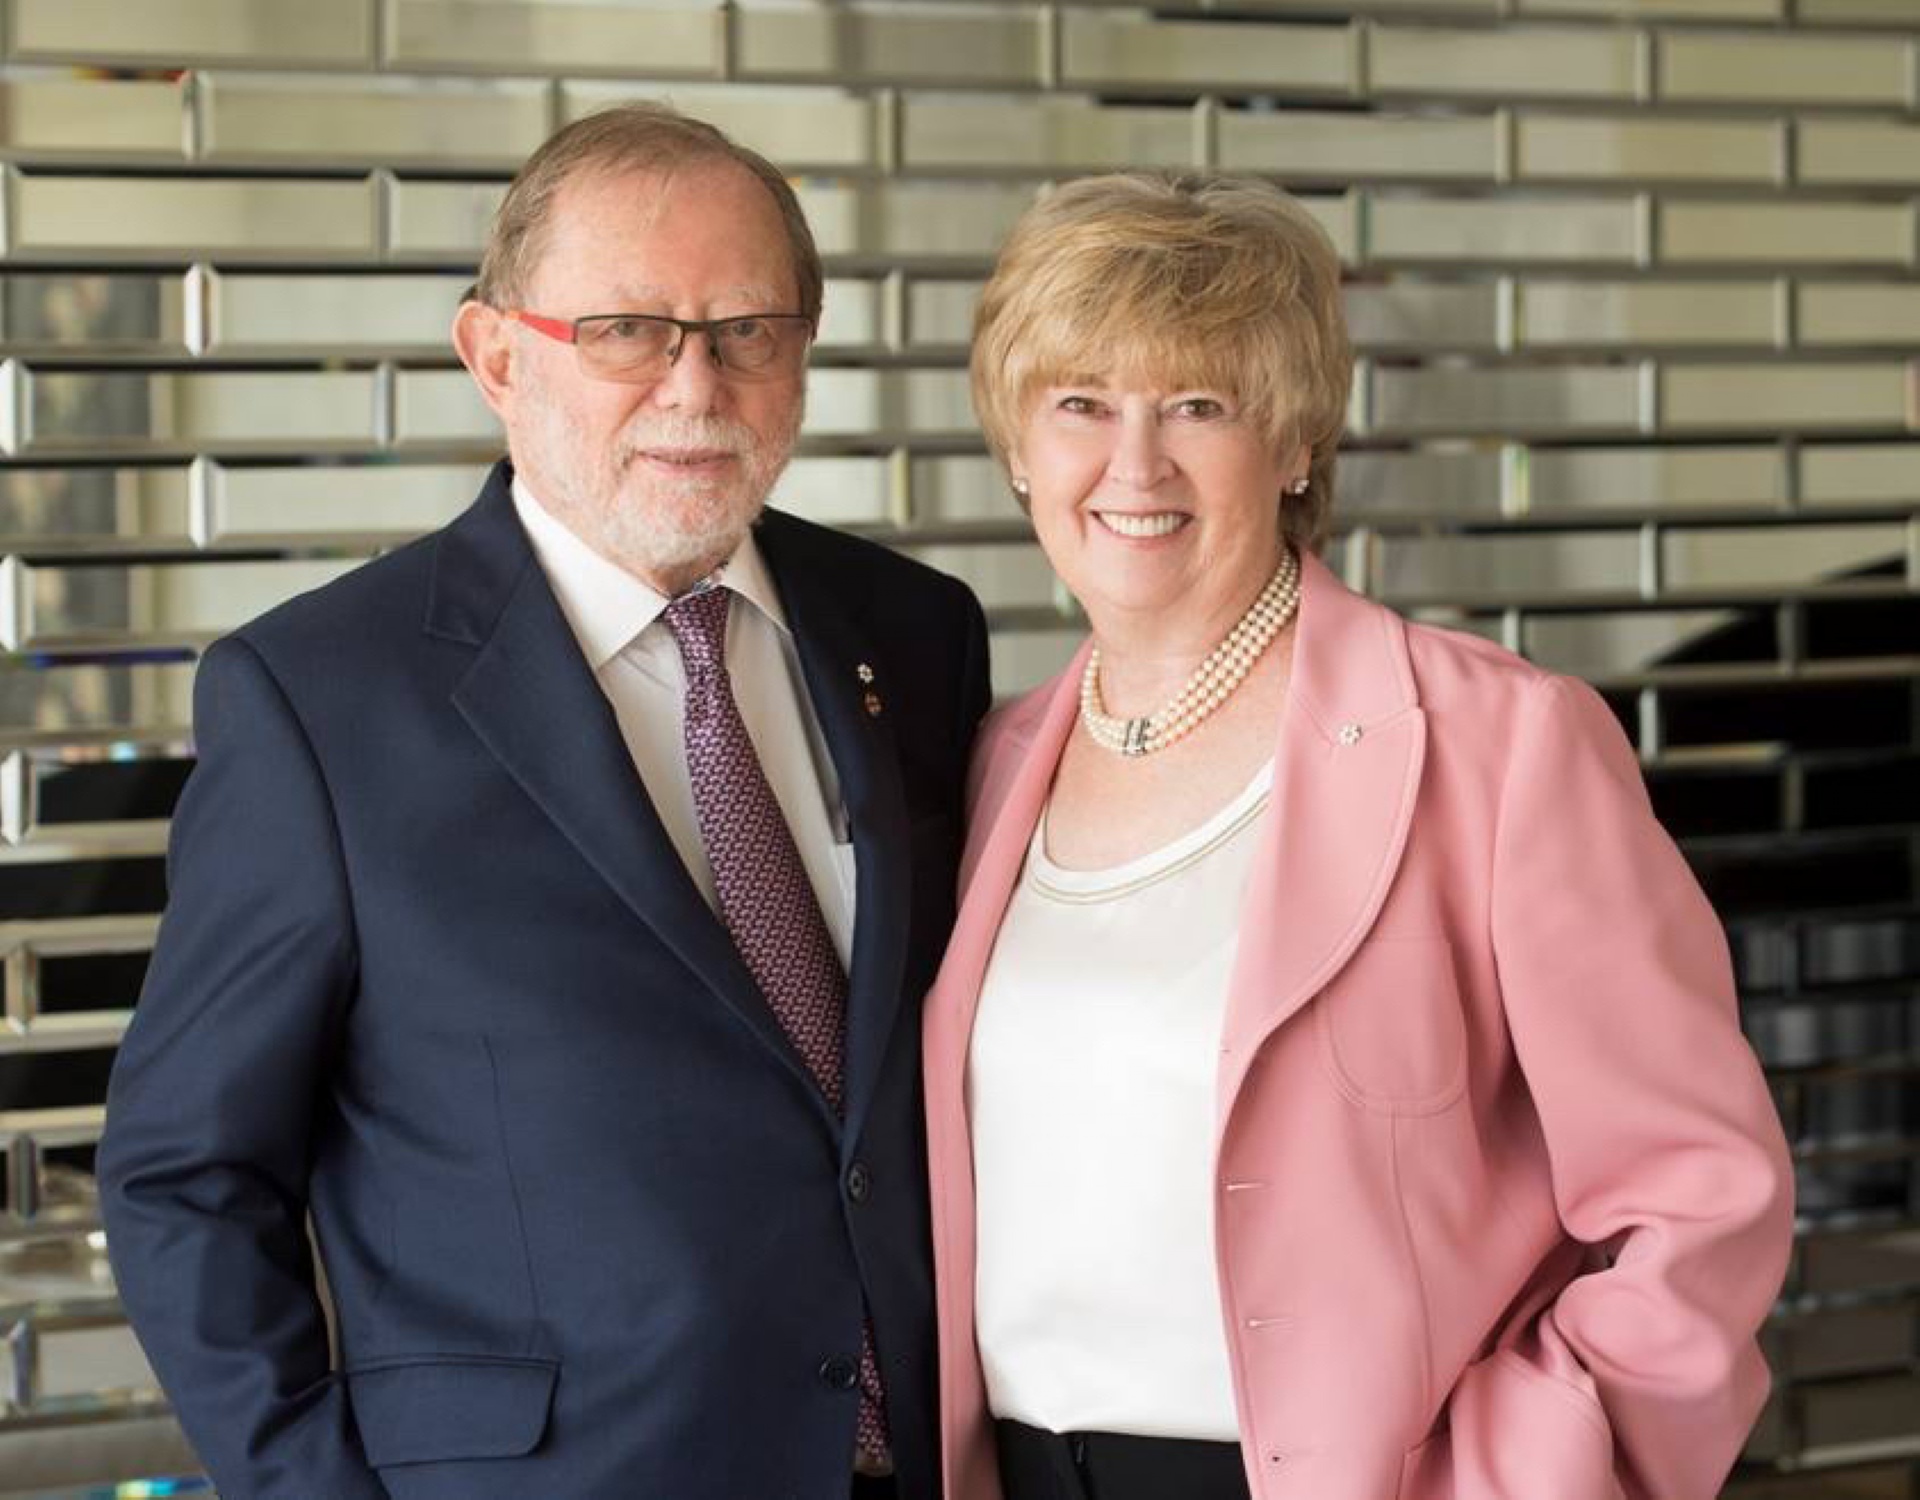 Fonds national juif du Canada | The Jewish National Fund (JNF) of Edmonton is thrilled to announce the generous contribution made by The Dianne & Irving Kipnes Foundation, which will fully